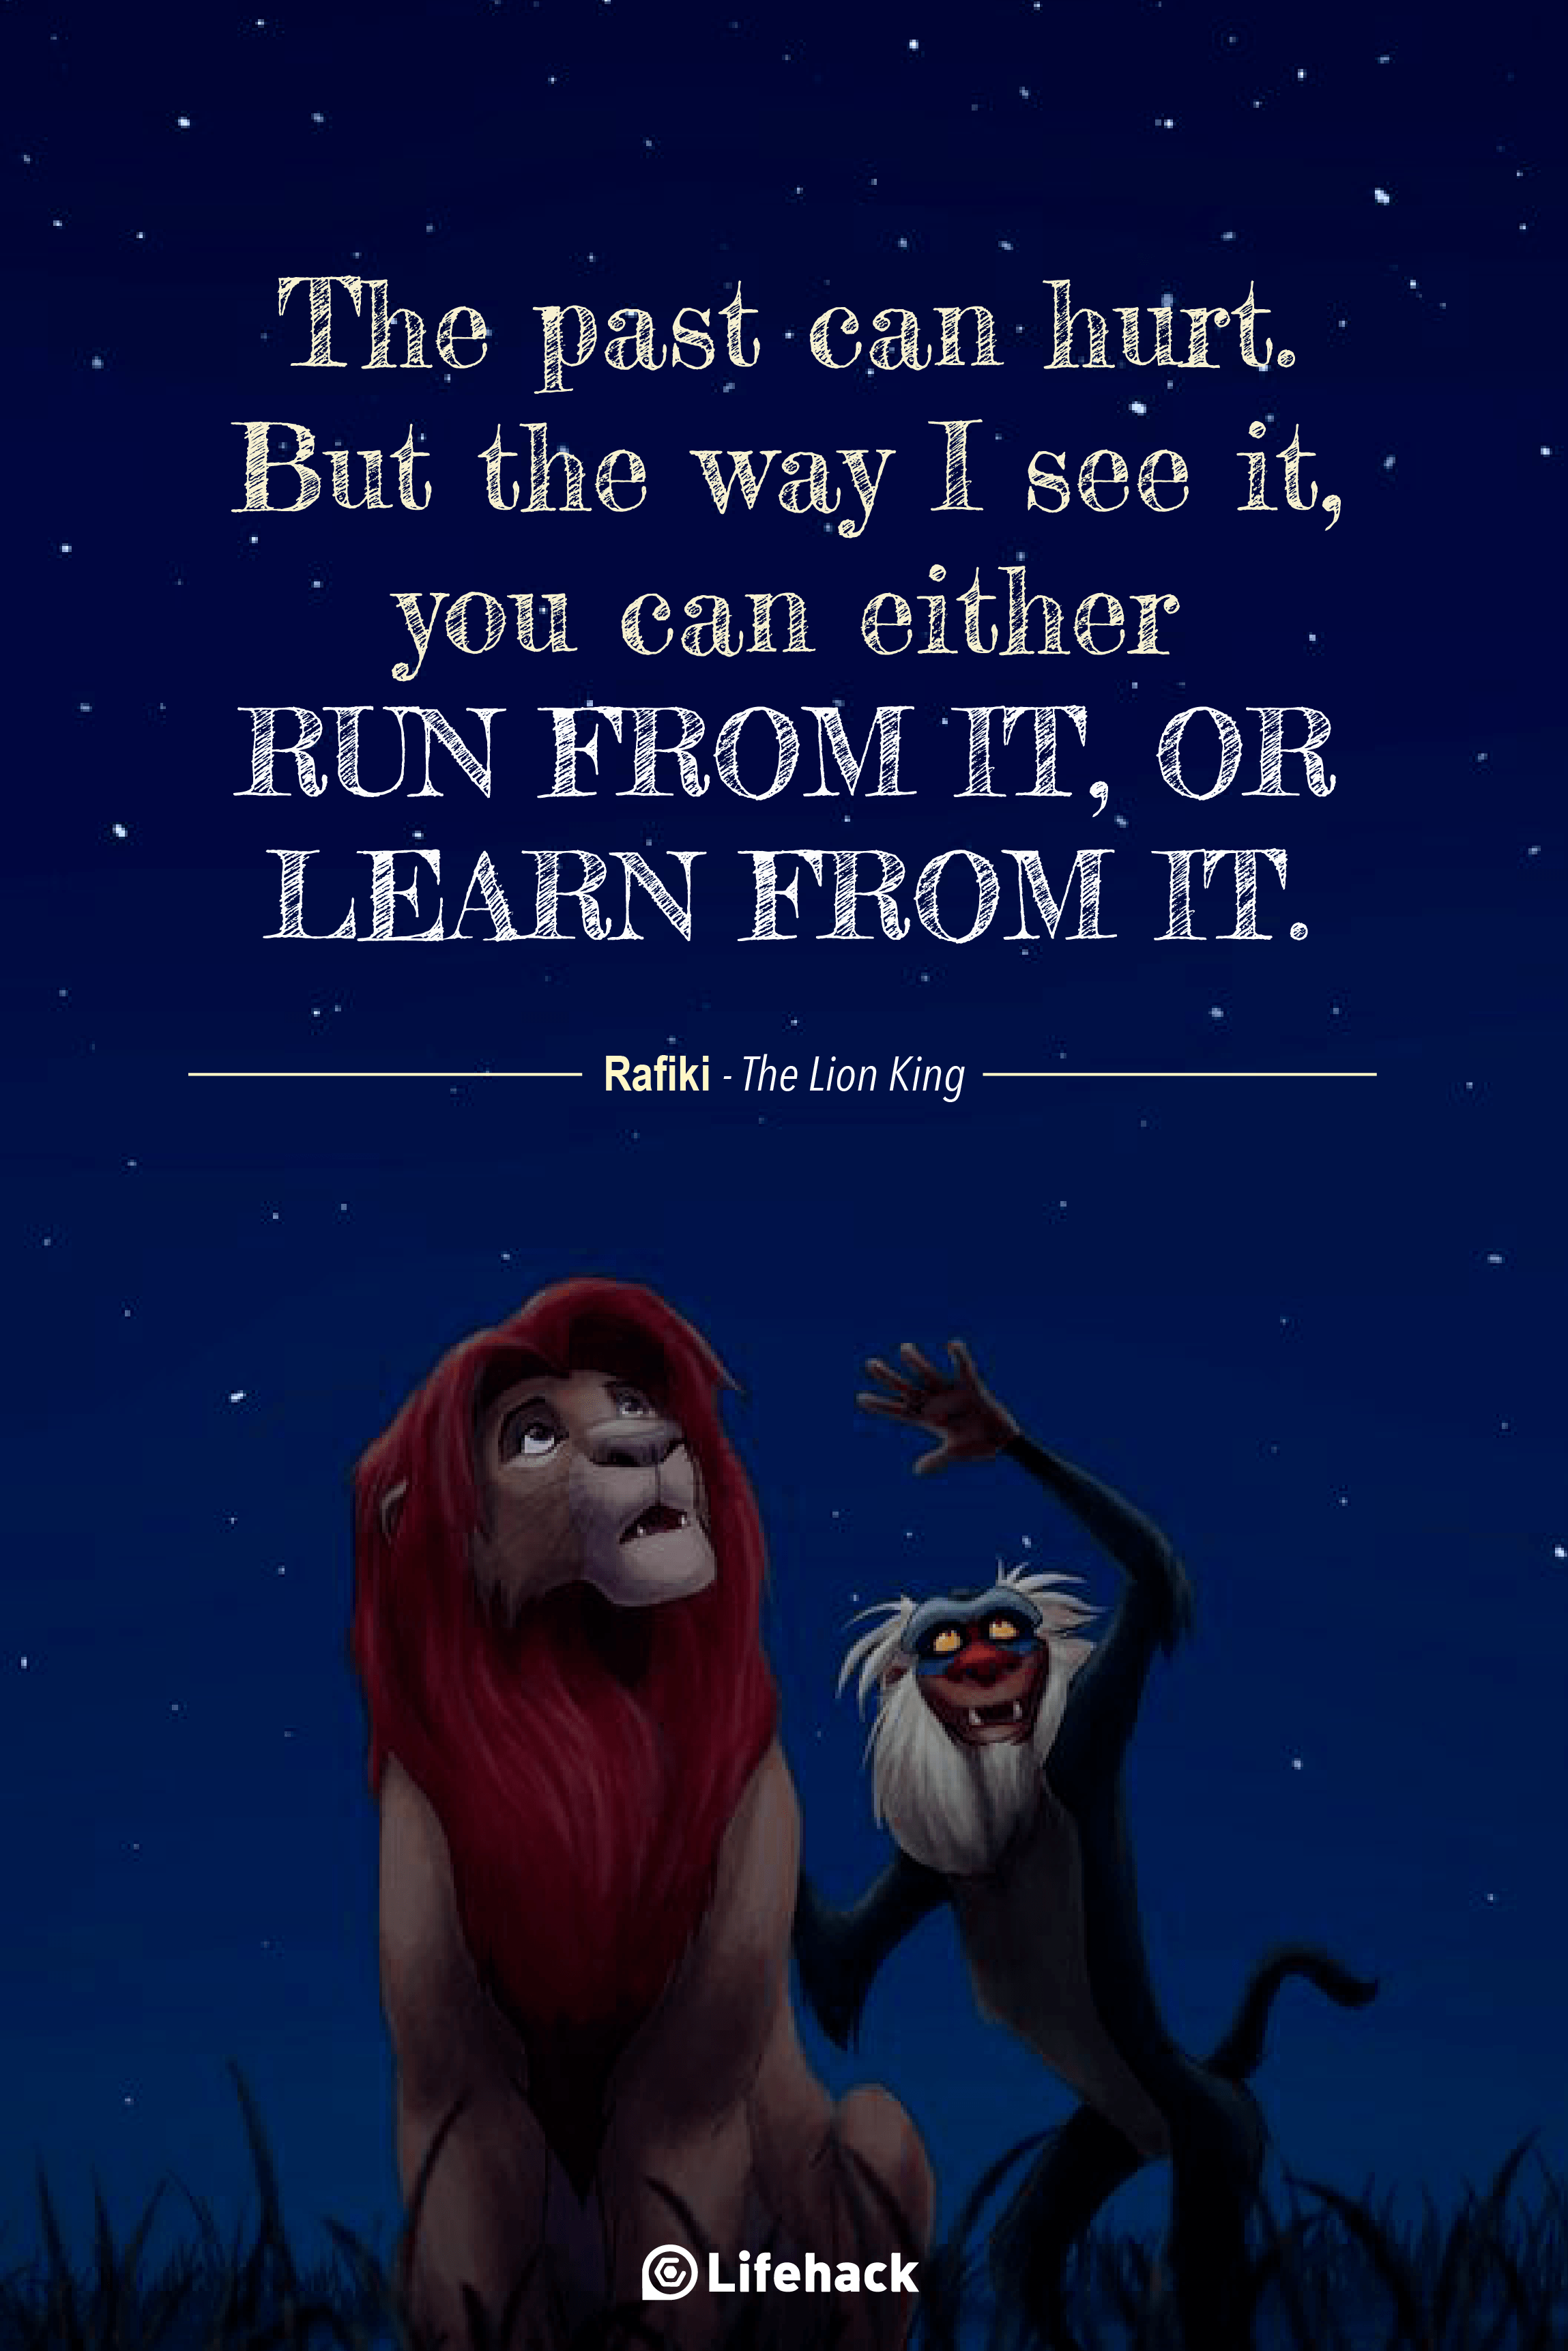 quotes by disney movies